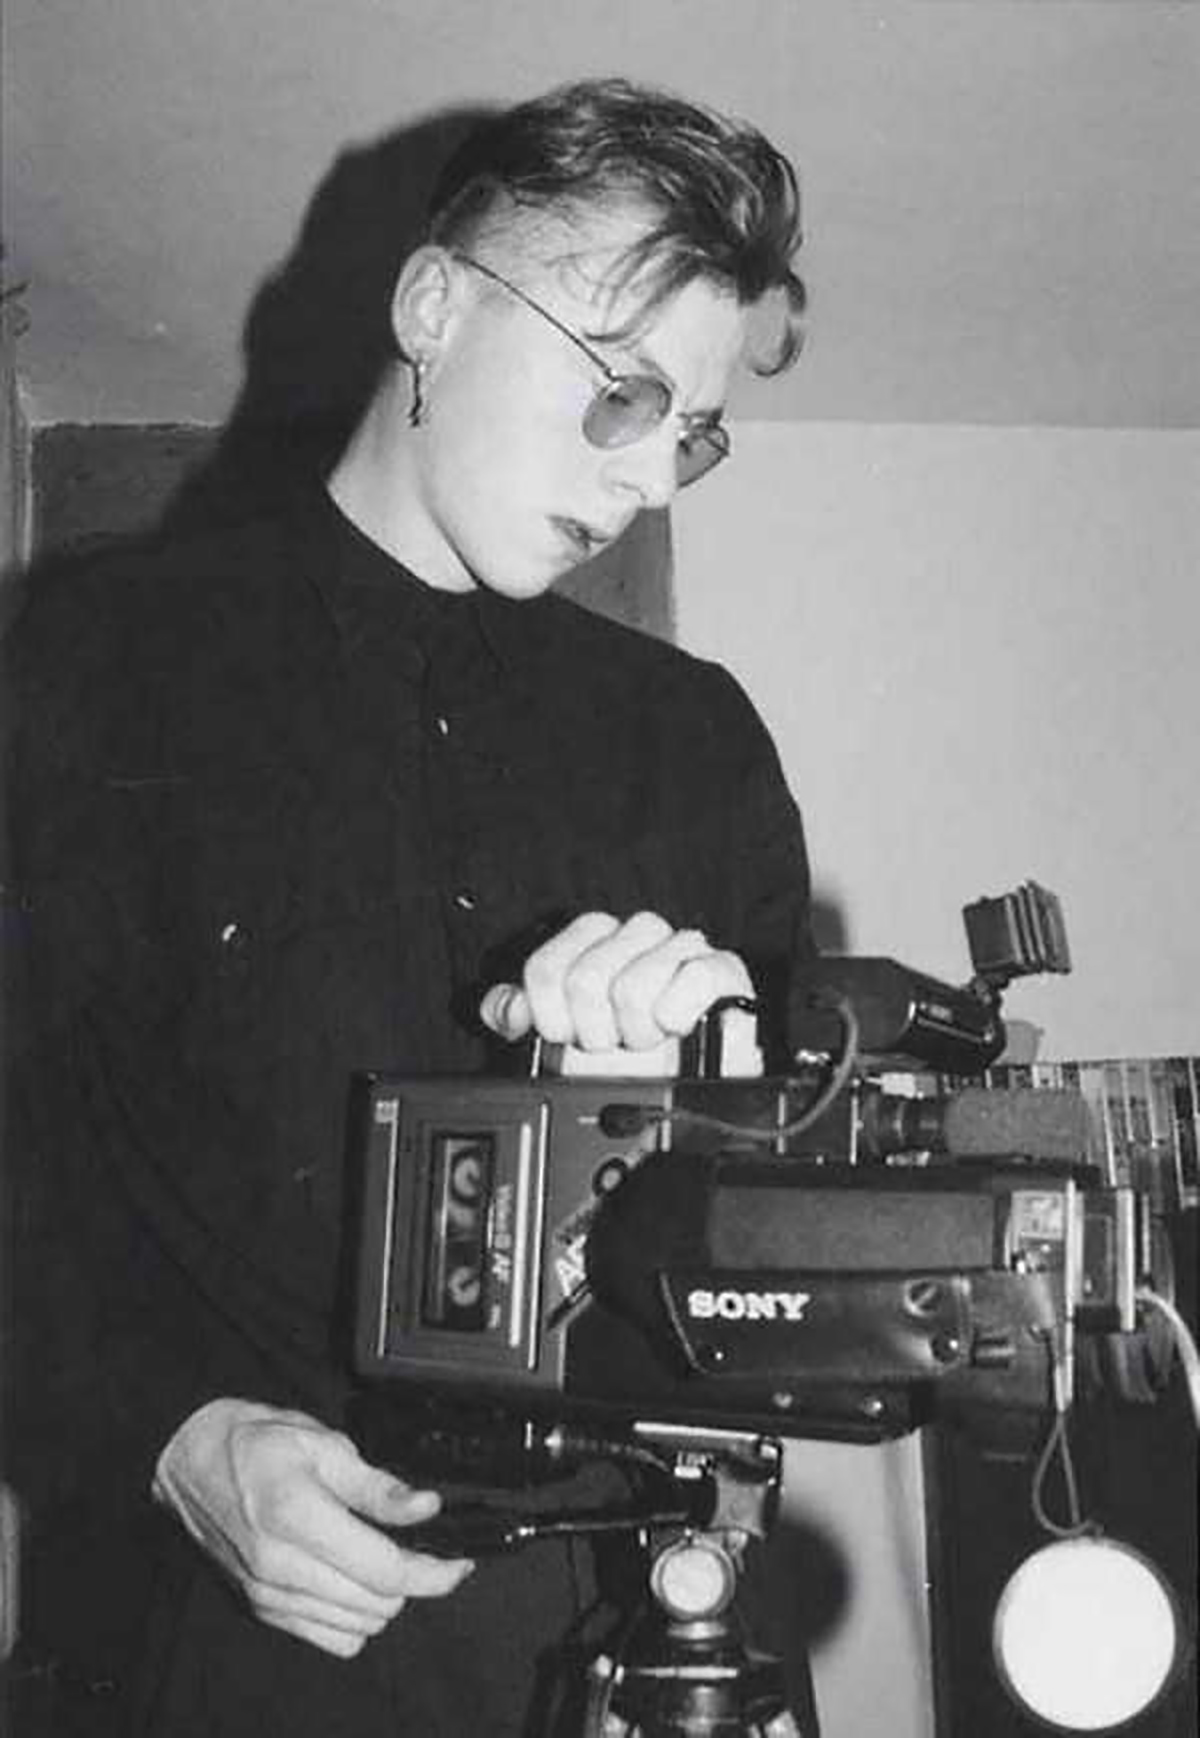 Simon Pegg preparing a camera for a project in the late 1980s.